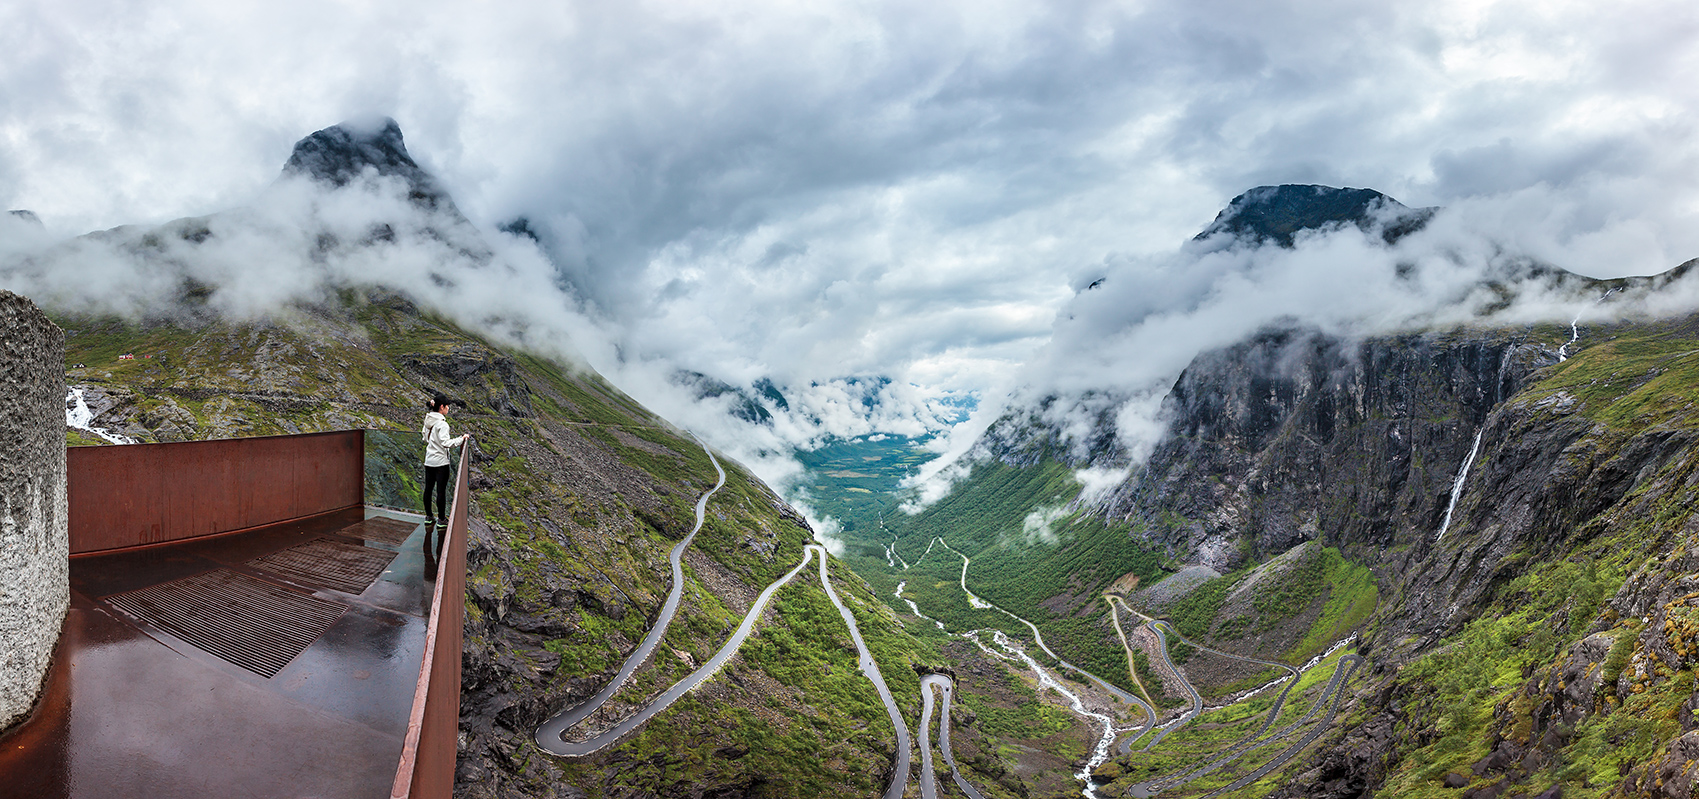 Norway Tour Packages From India | Norway Fjord Tours